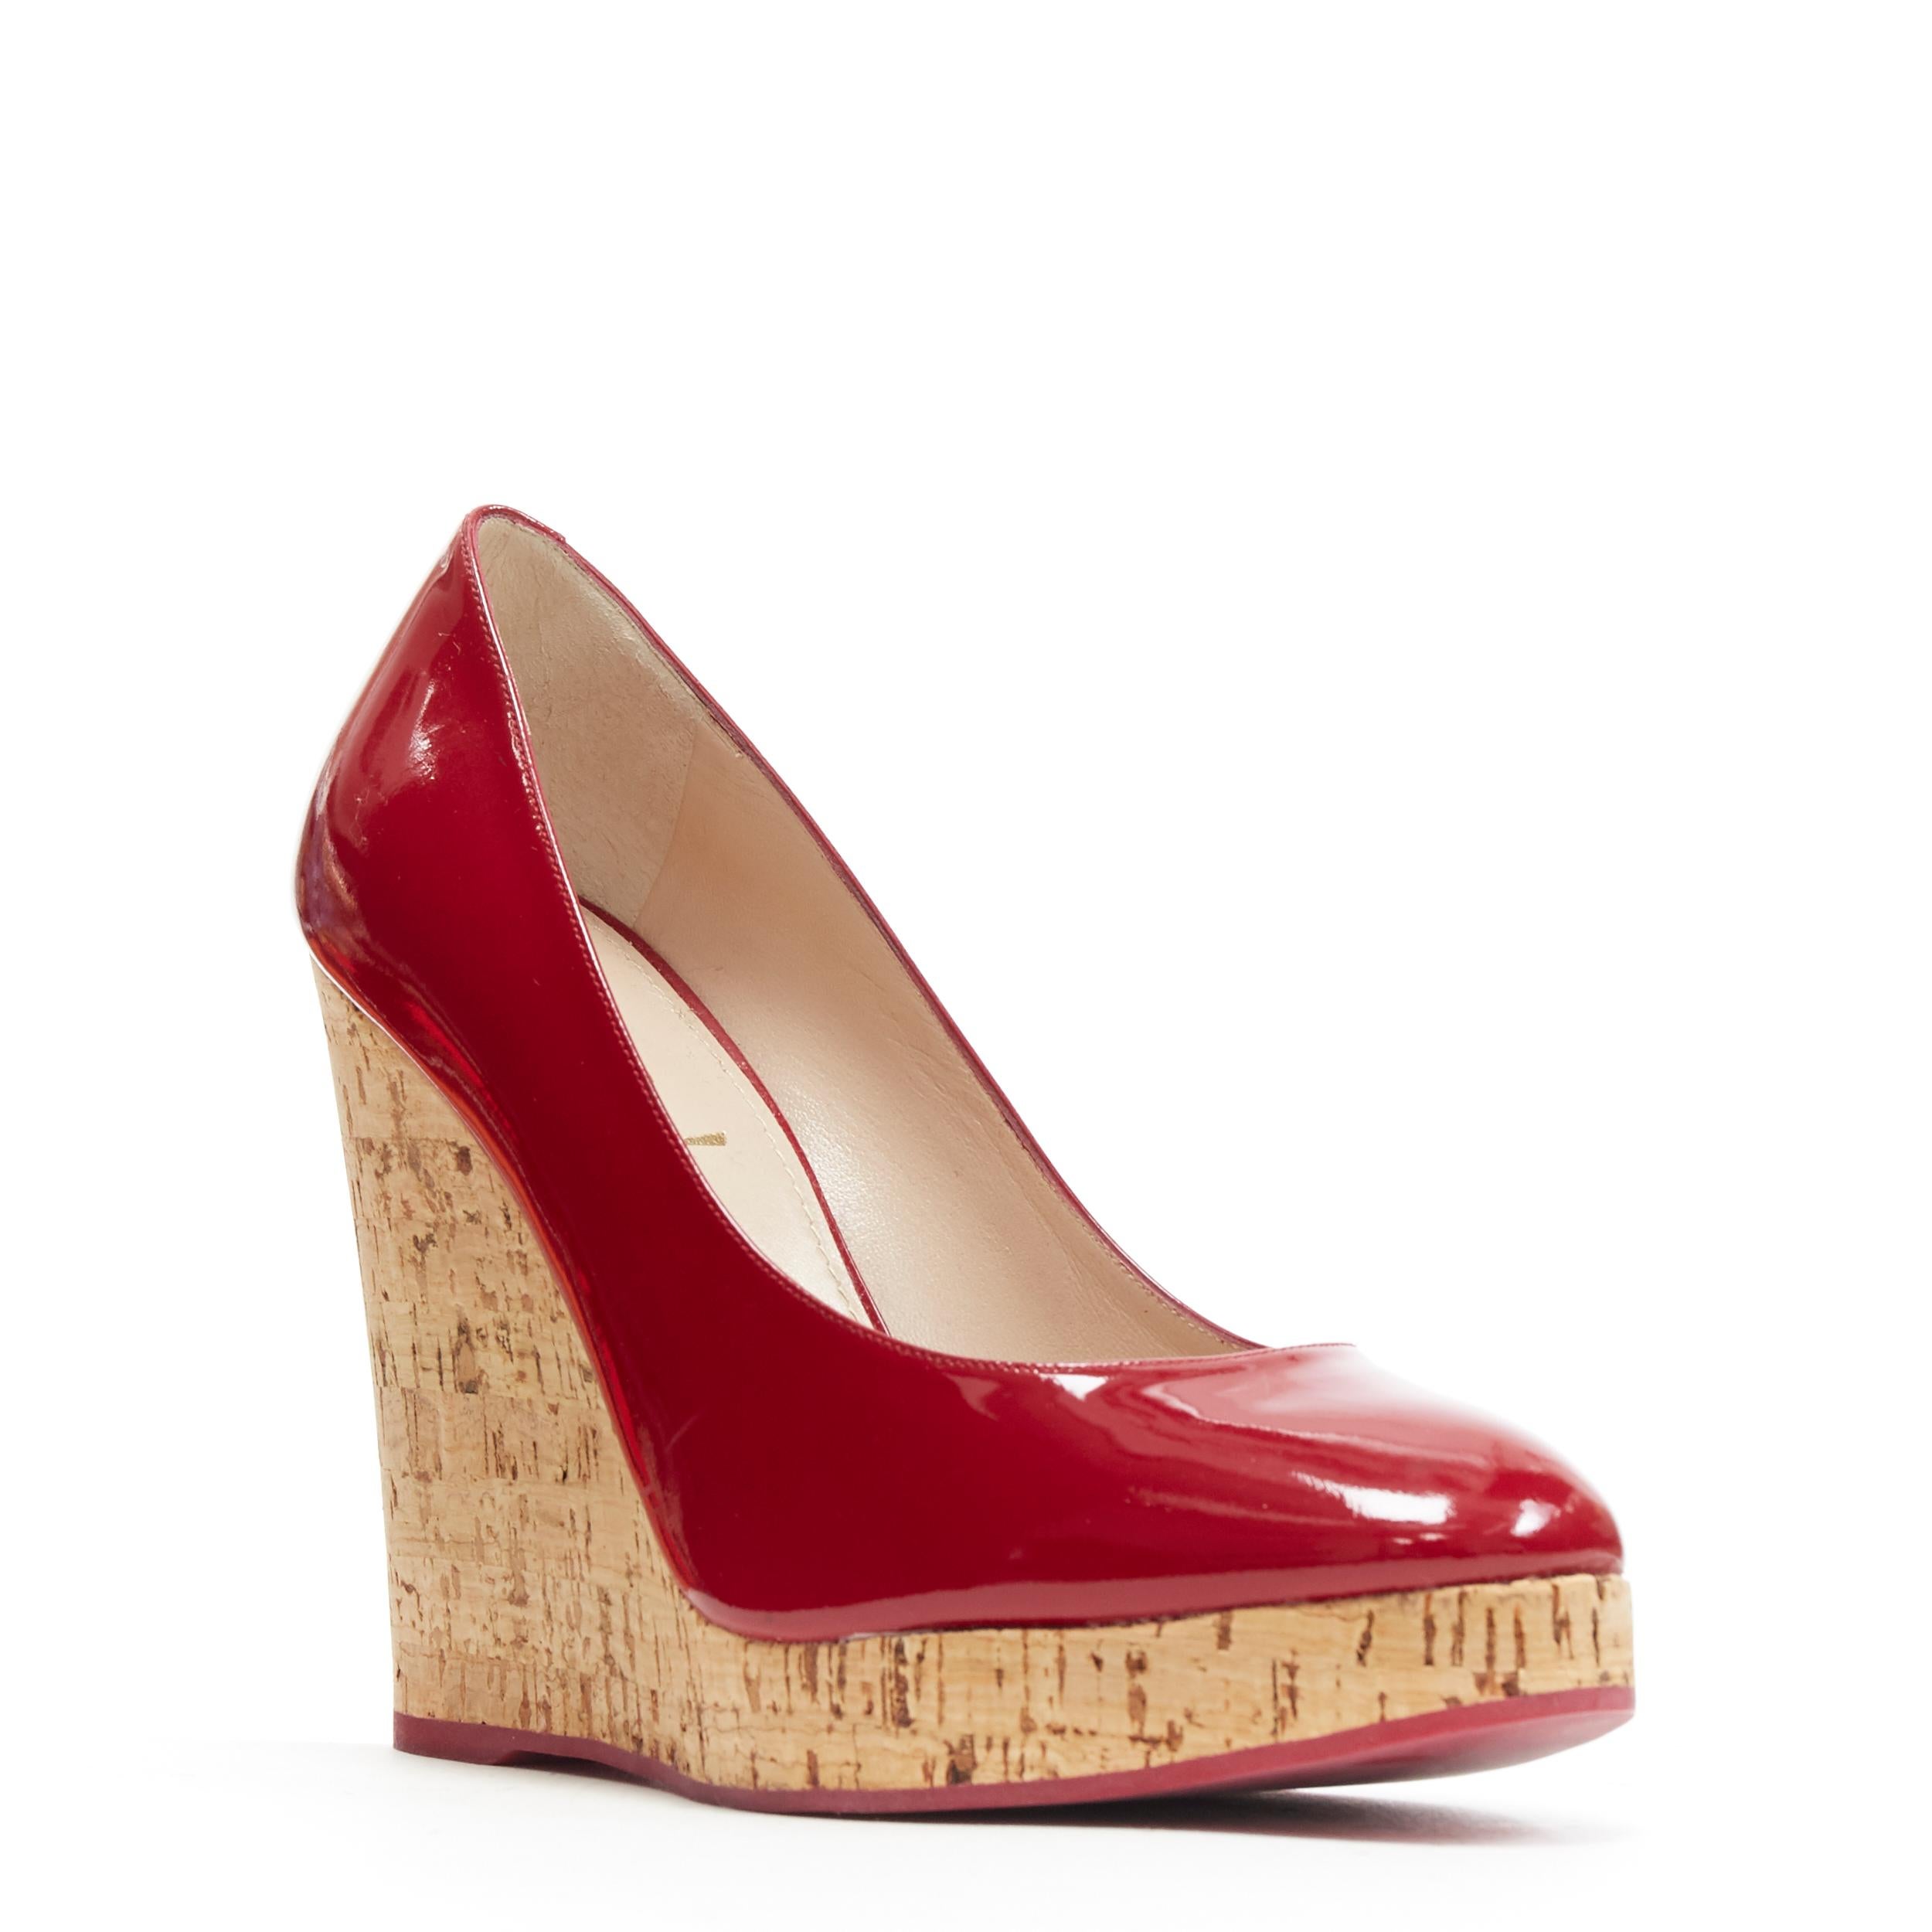 YVES SAINT LAURENT YSL red patent leather round toe cork wedge platform EU39
Brand: Yves Saint Laurent
Model Name / Style: Cork wedge
Material: Patent leather
Color: Red
Pattern: Solid
Extra Detail: Ultra High (4 in & Higher) heel height. Almond